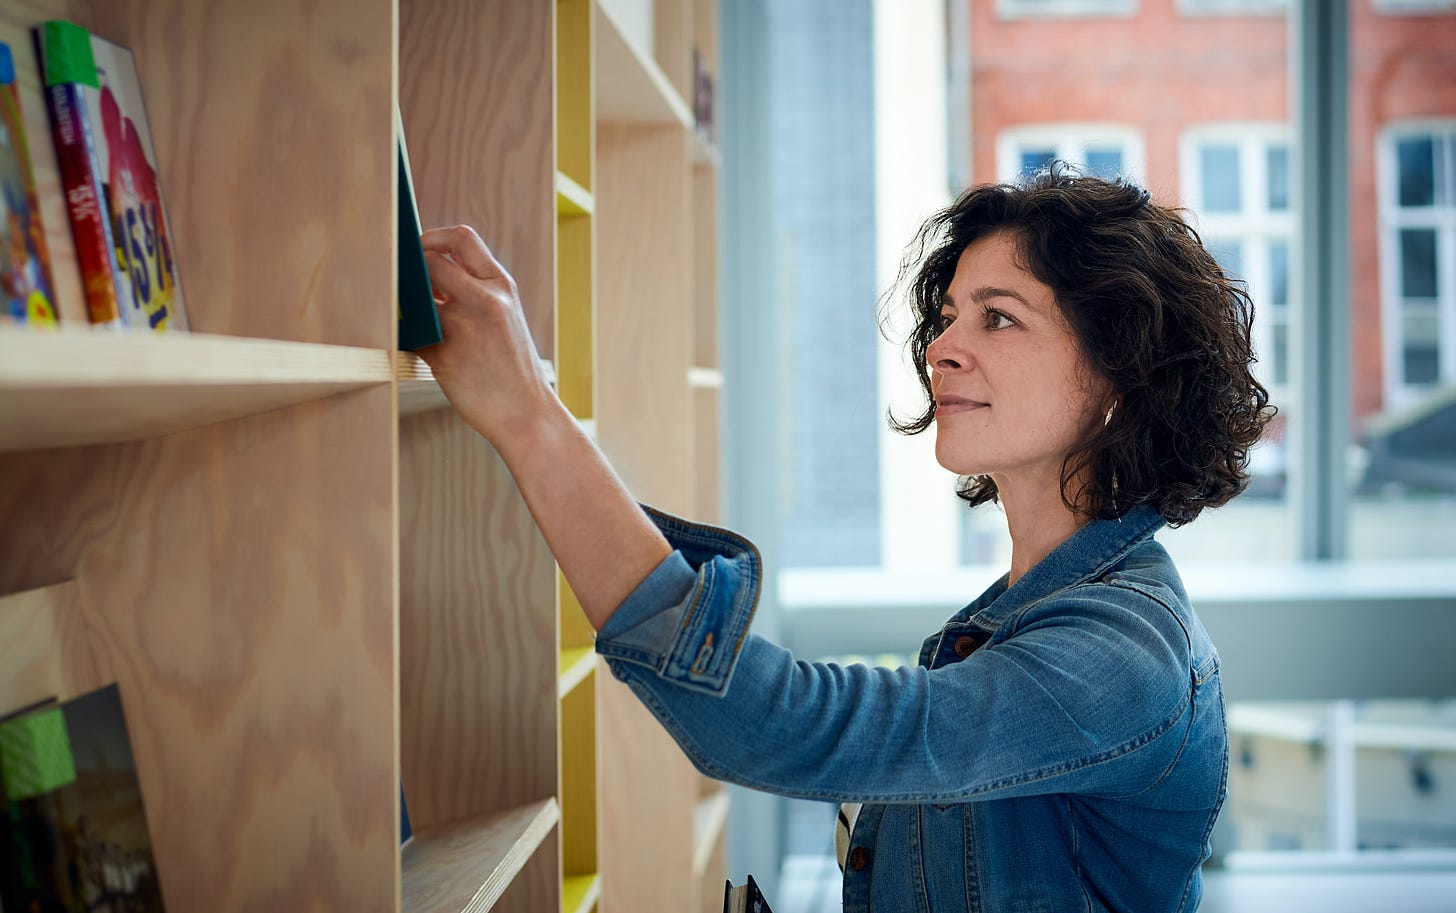 A woman searching through books on a shelf in a library